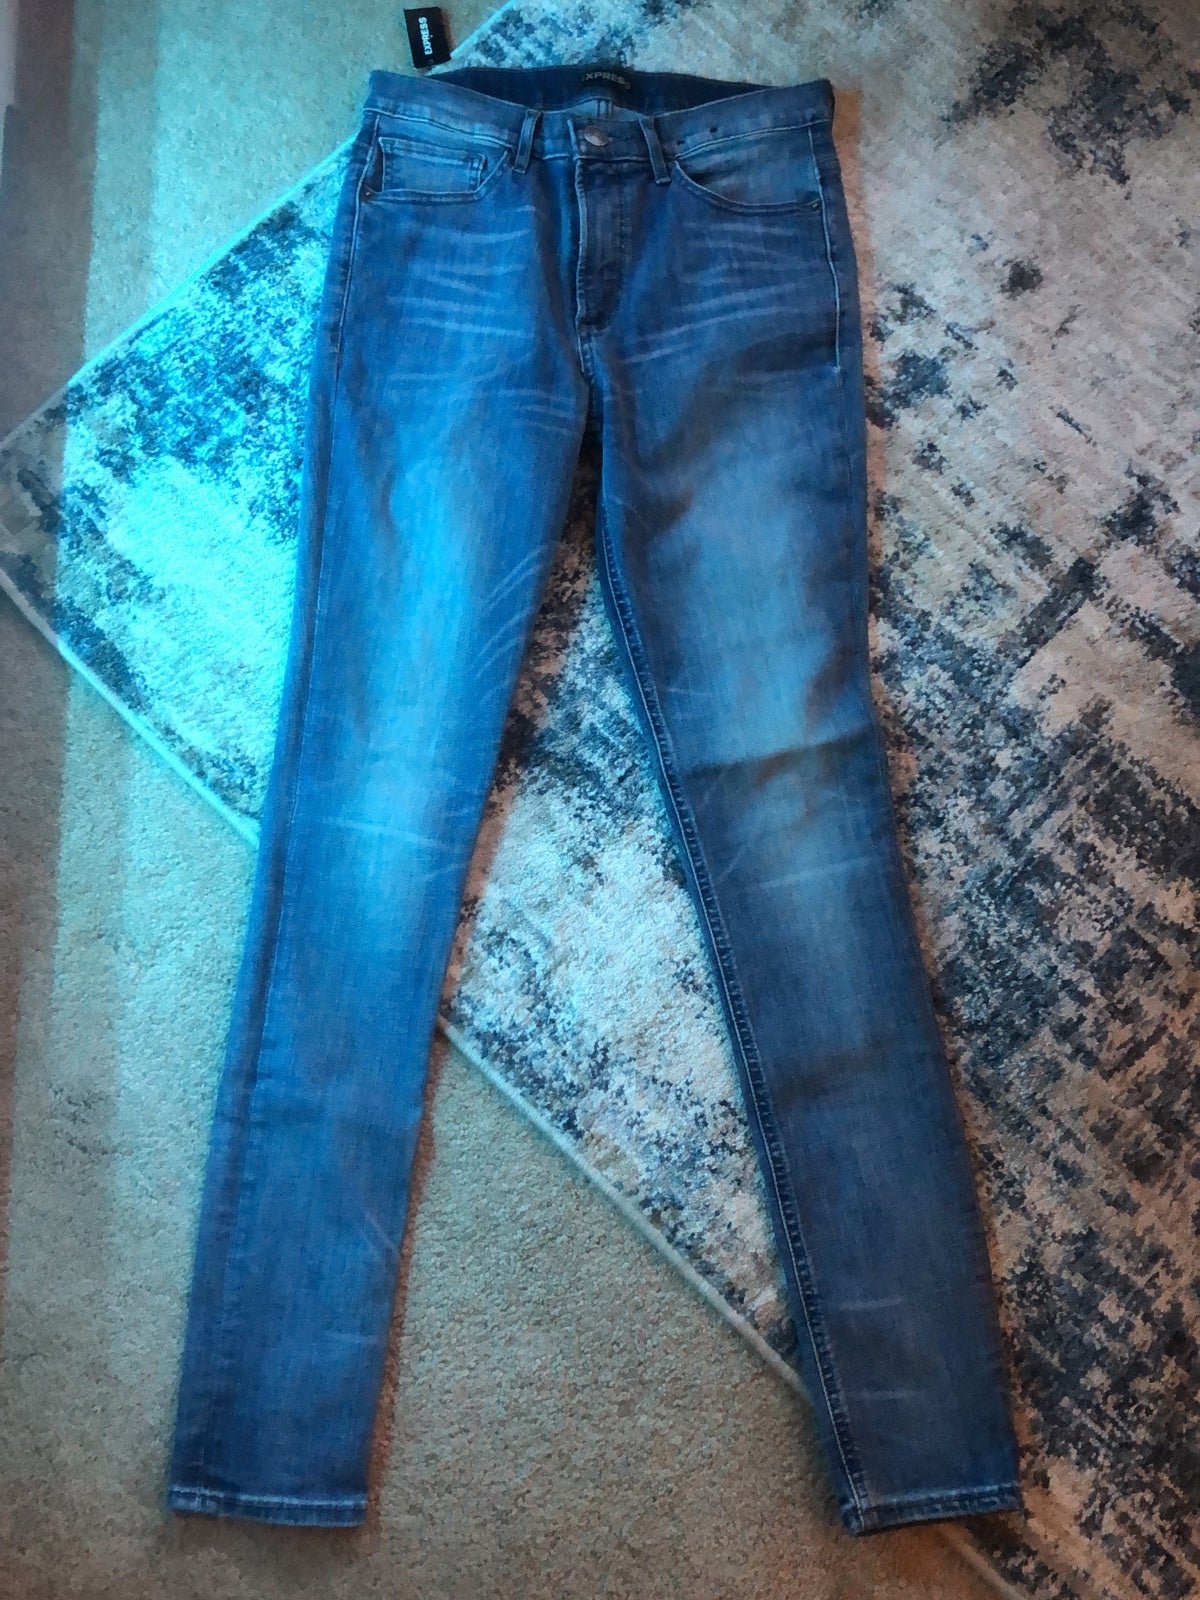 Amazing Nwt Express Jeans HrqyWRFLF Store Online